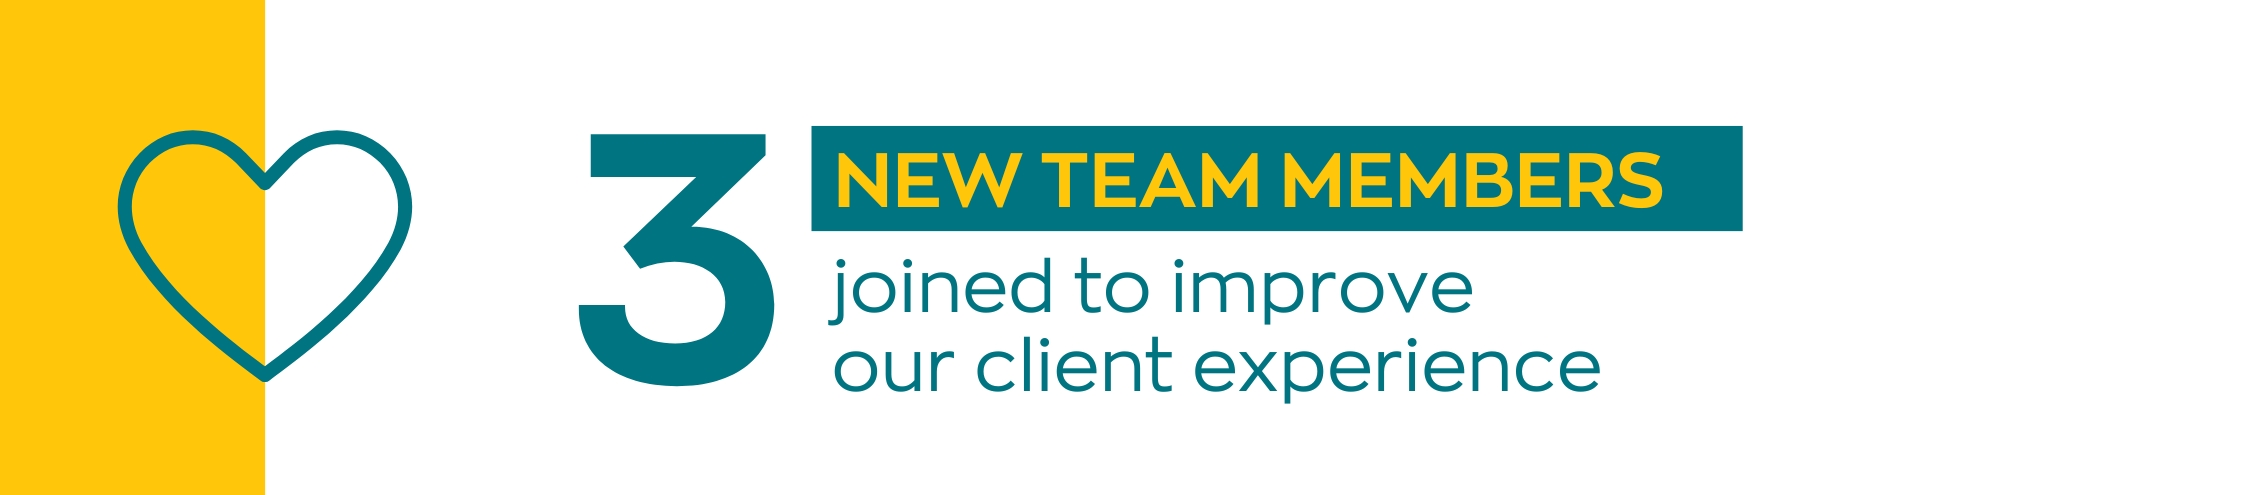 3 new team members joined to improve our client experience